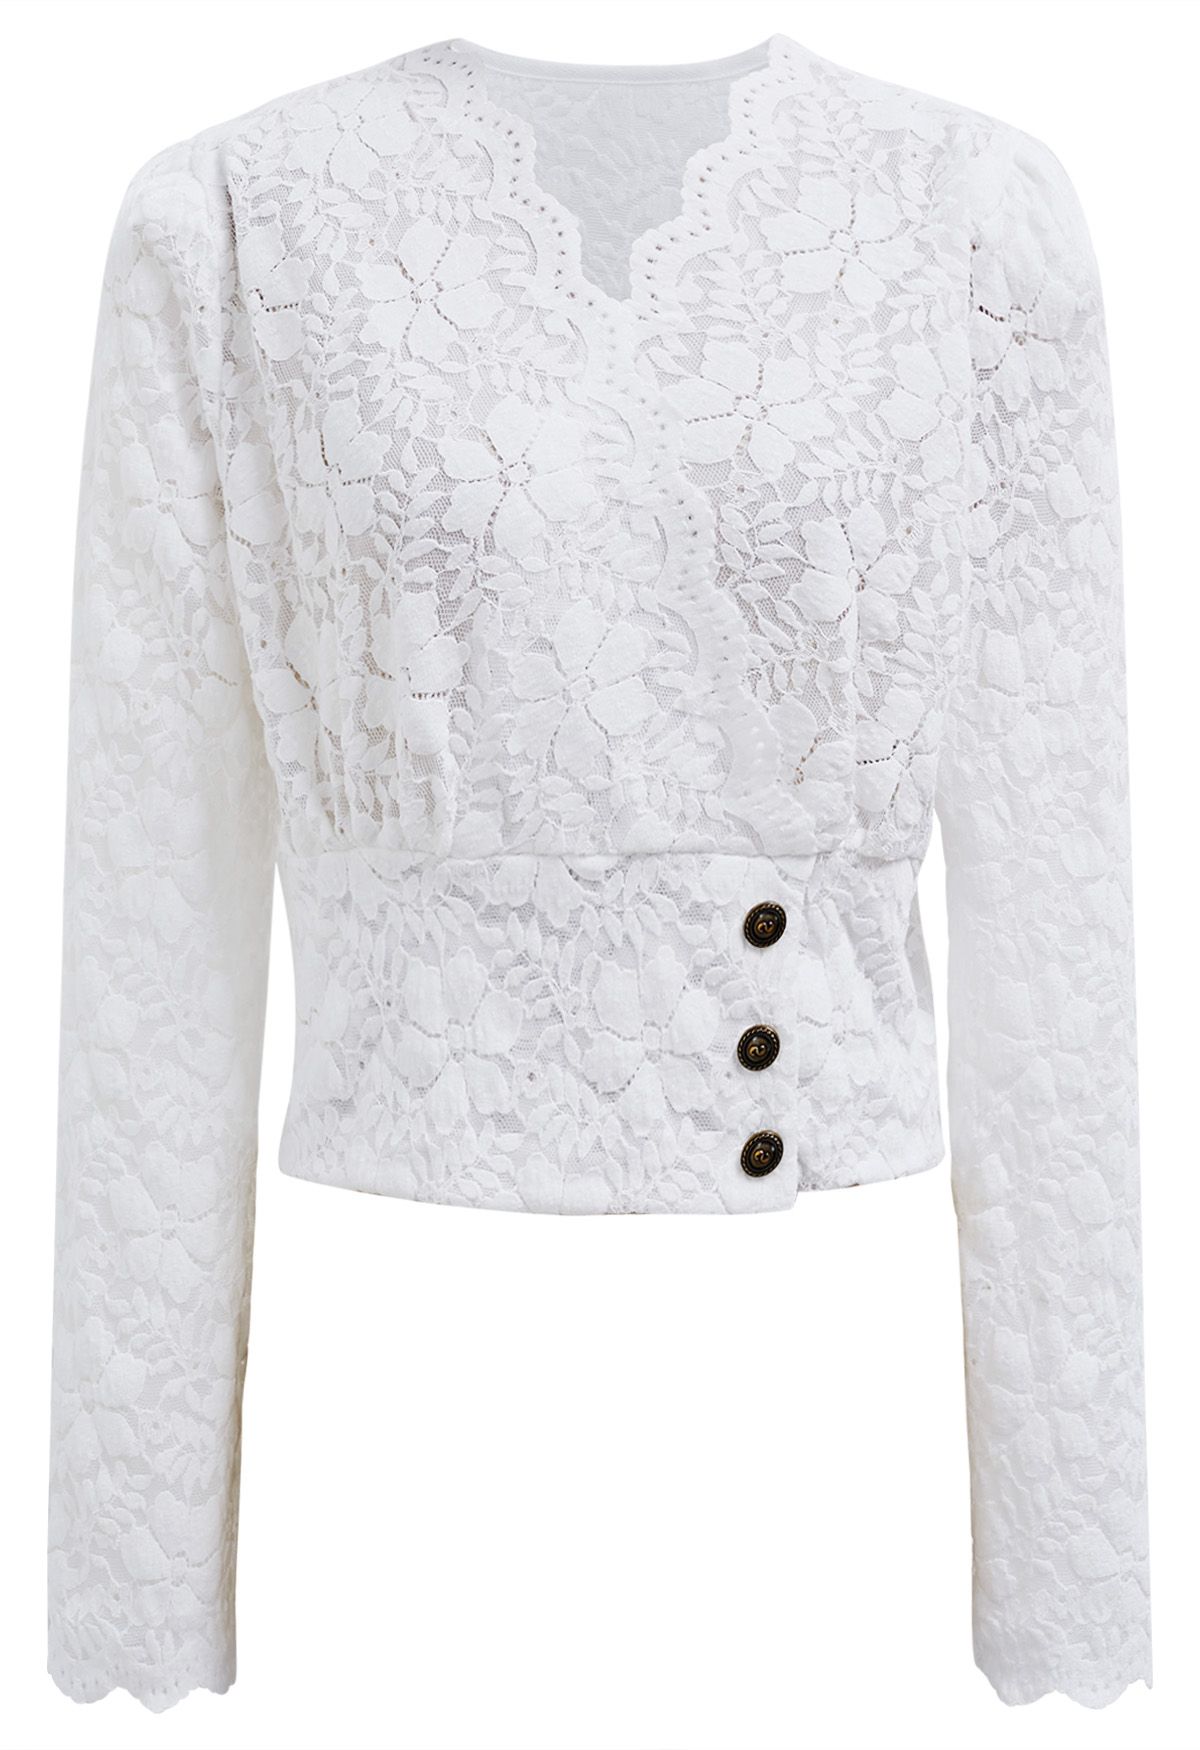 Exquisite Floral Lace Crop Wrap Top in Ivory